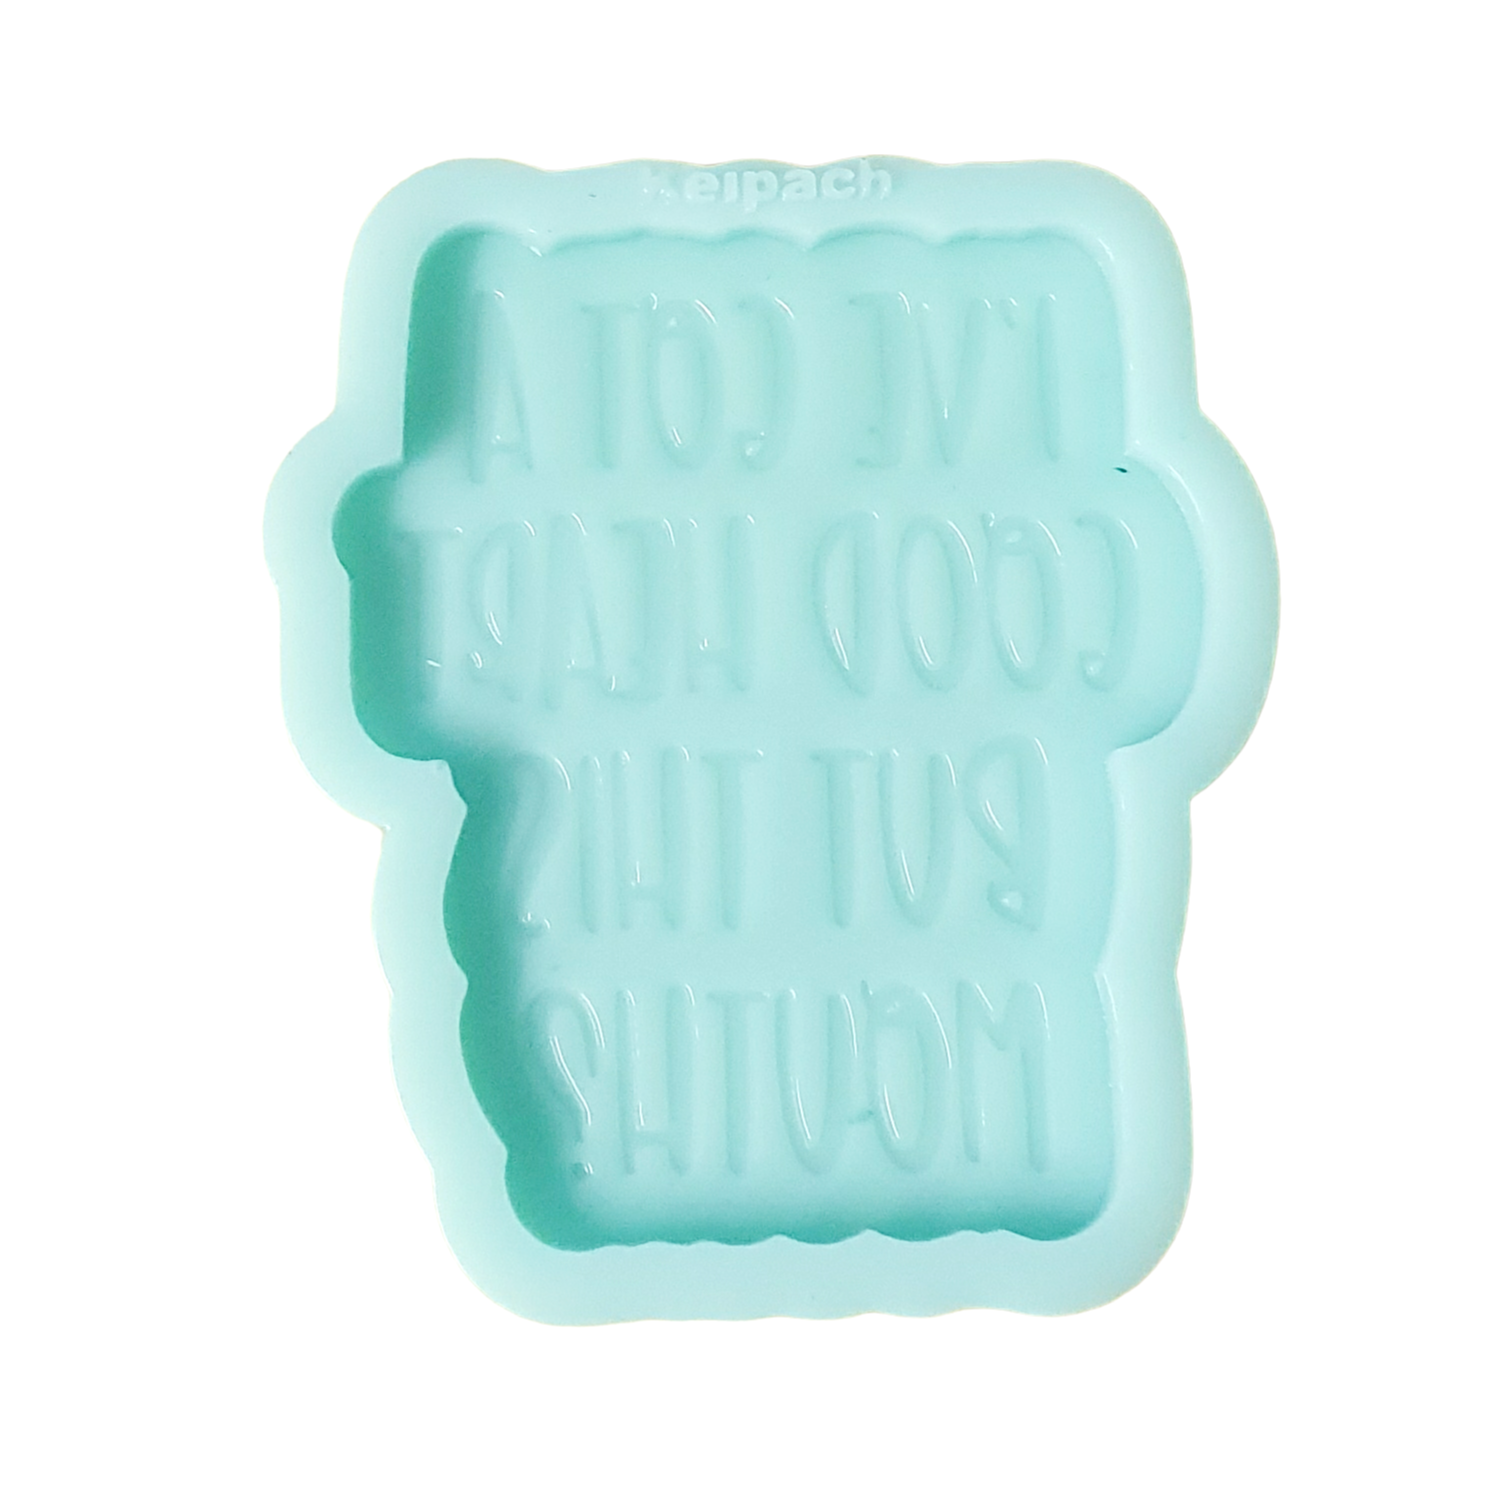 "I've Got a Good Heart, But This Mouth" Silicone Resin Mould - Keipach